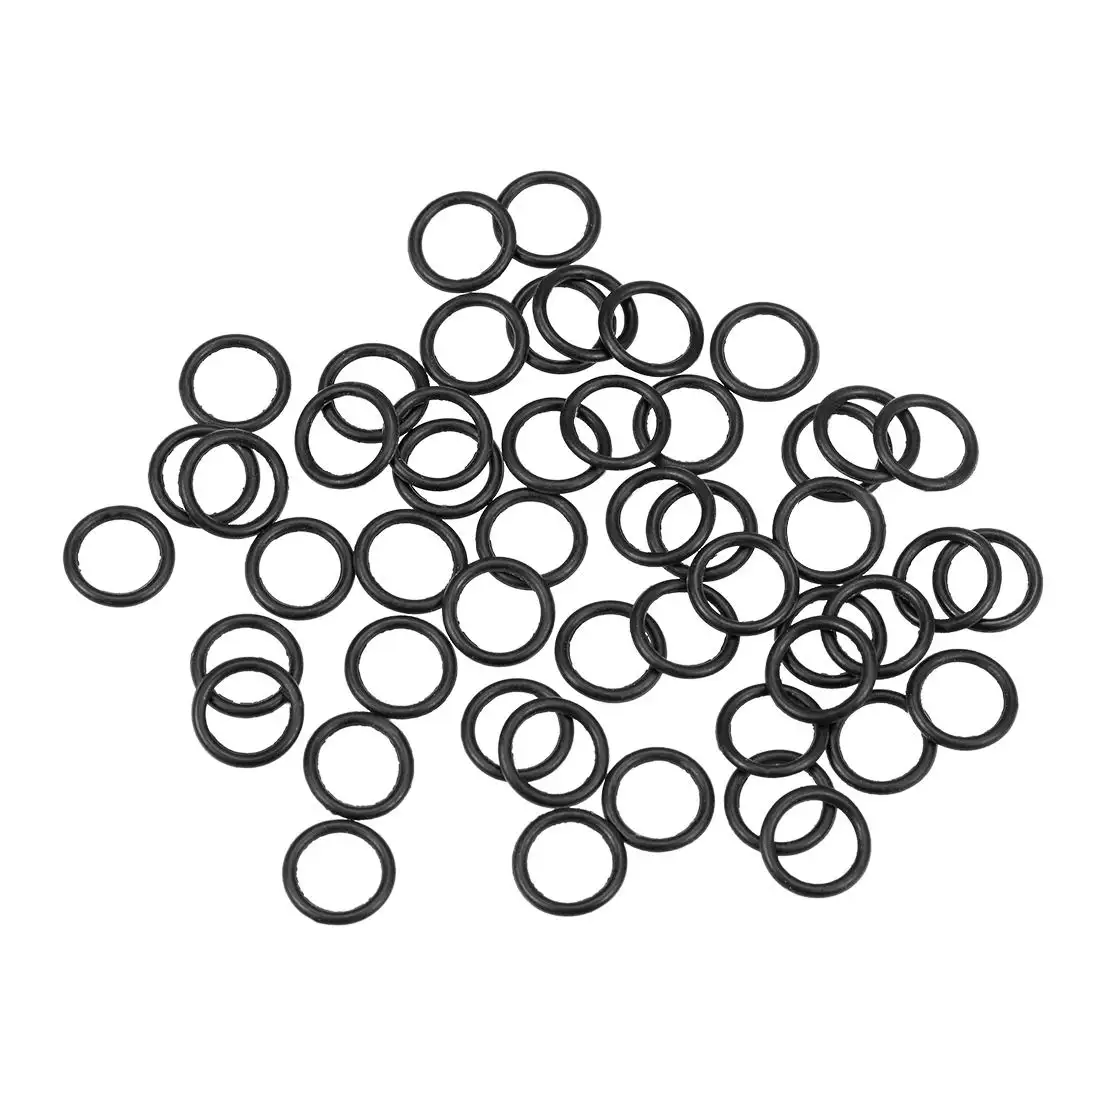 Professional made CS 2 2.5 3 3.5 4mm oring flat nbr epdm fkm silicone 12mm x 3mm o rings O-rings